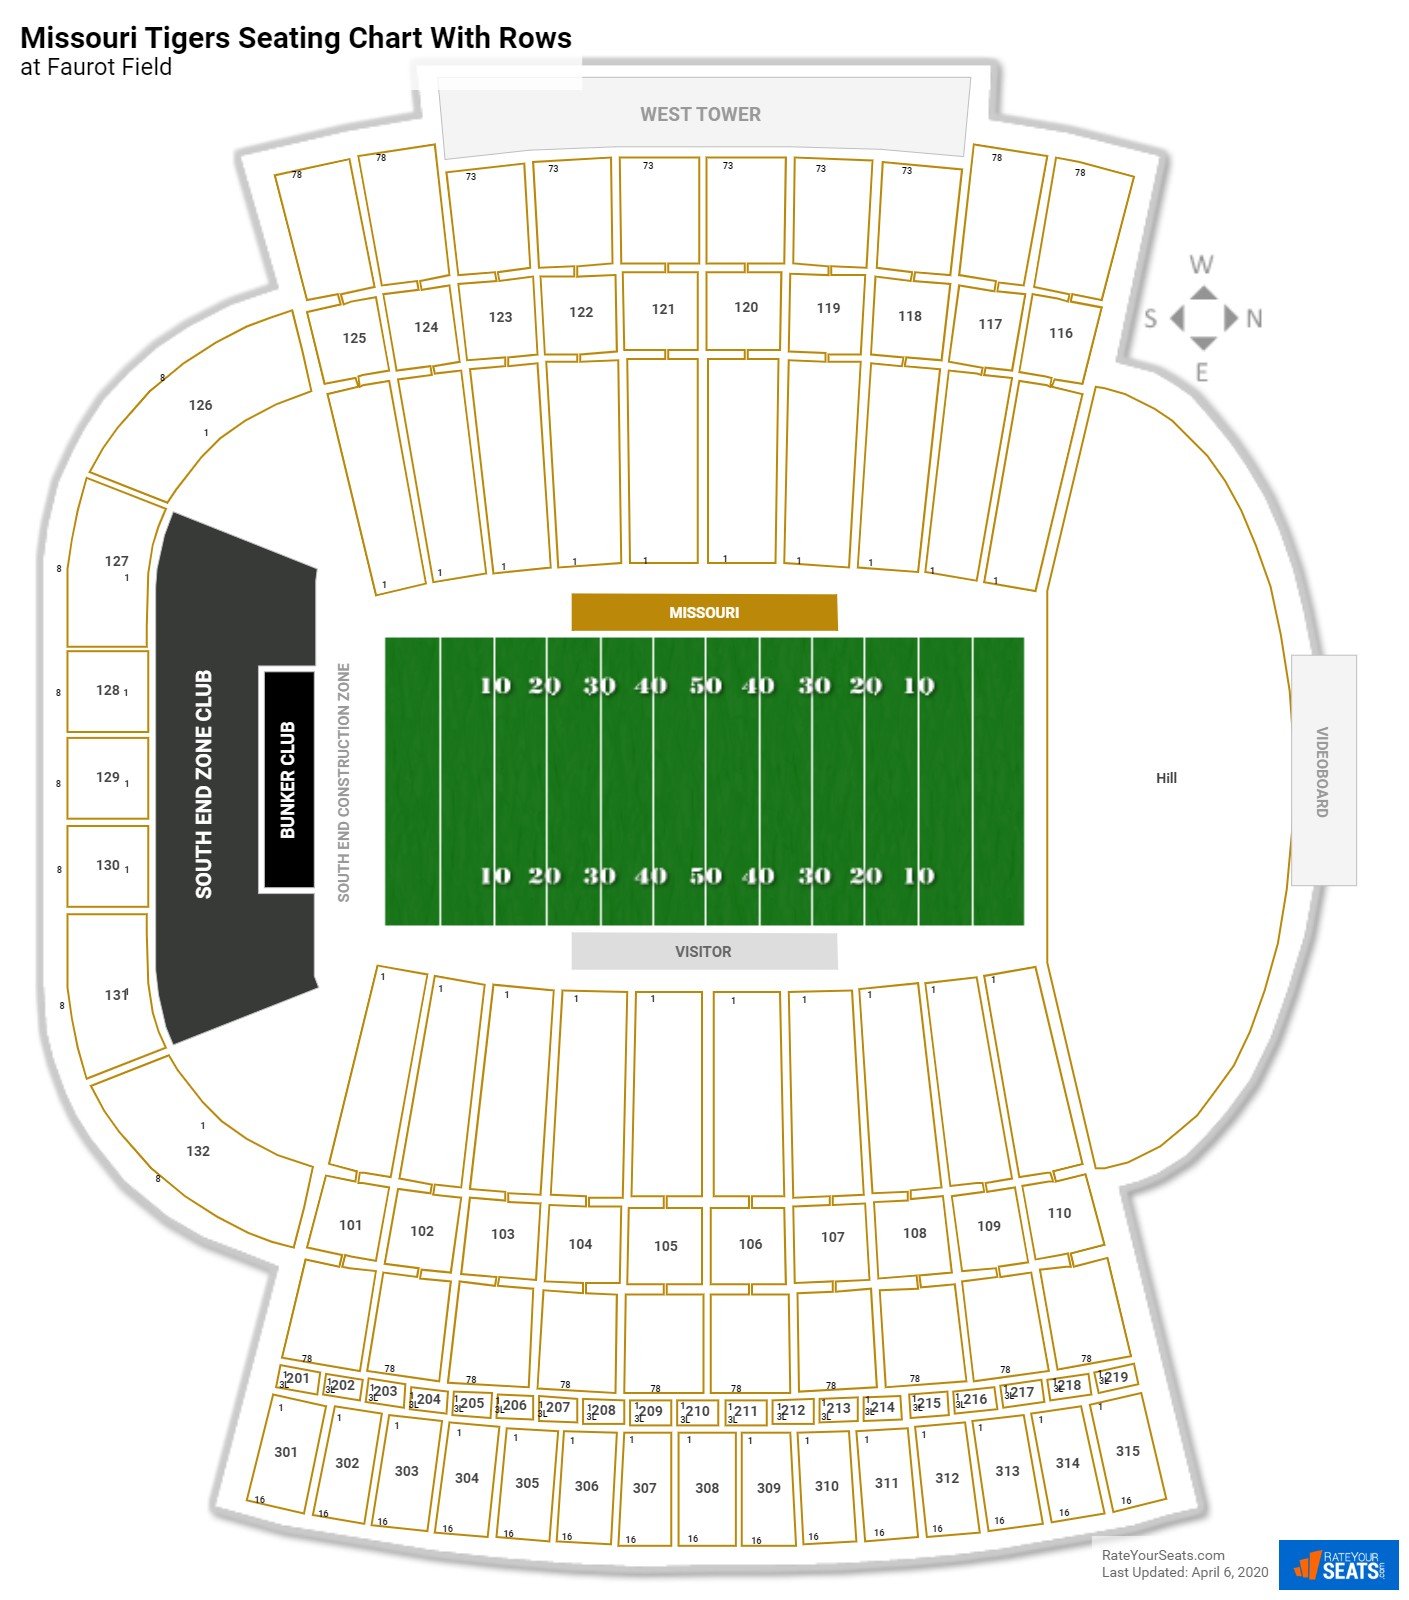 Faurot Field seating chart with row numbers